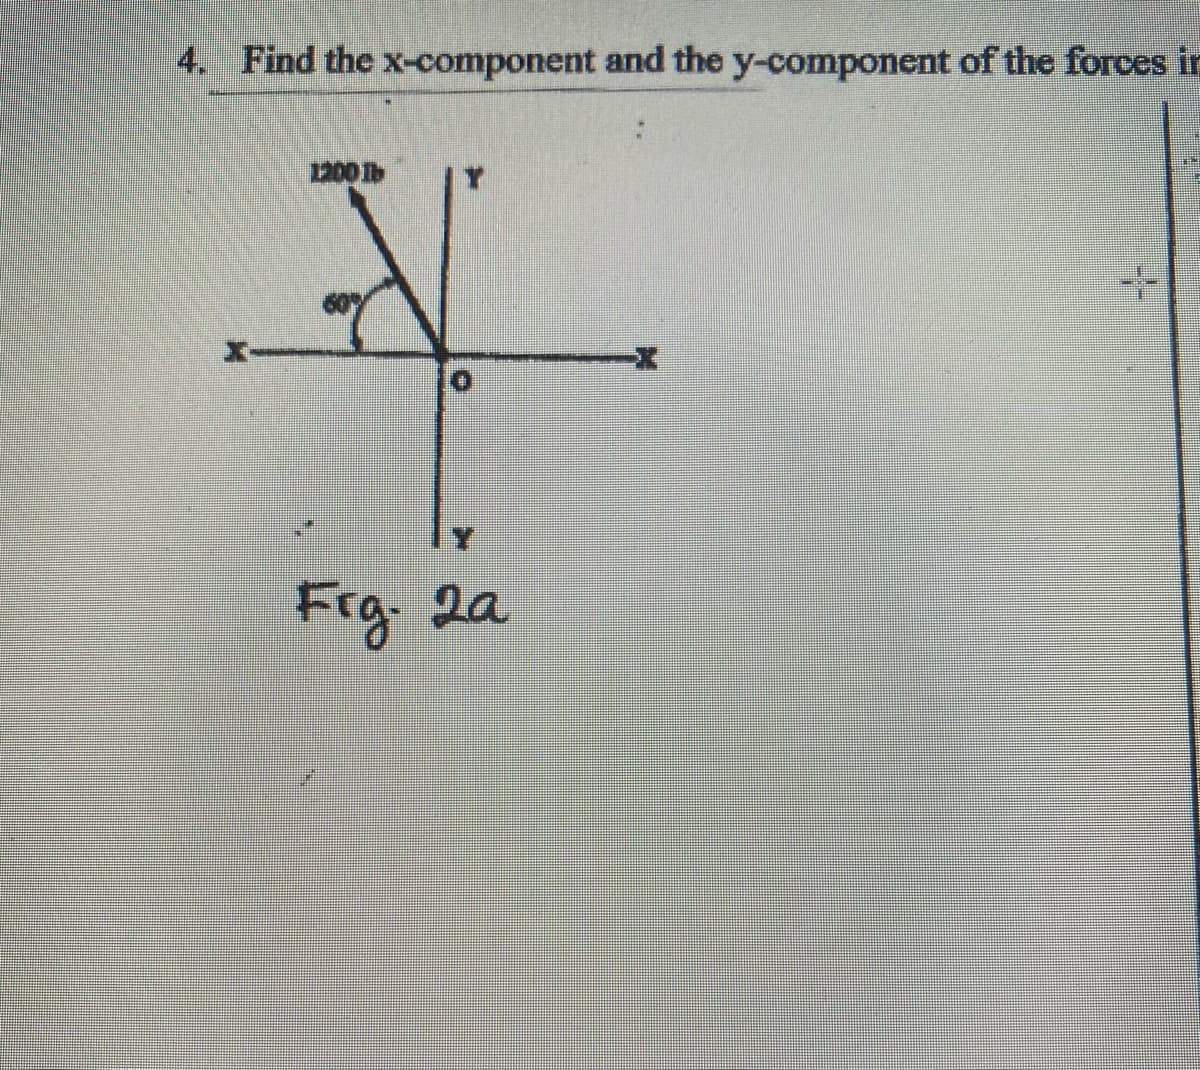 4. Find the x-component and the y-component of the forces in
1200 Ib
Frg. 2a
